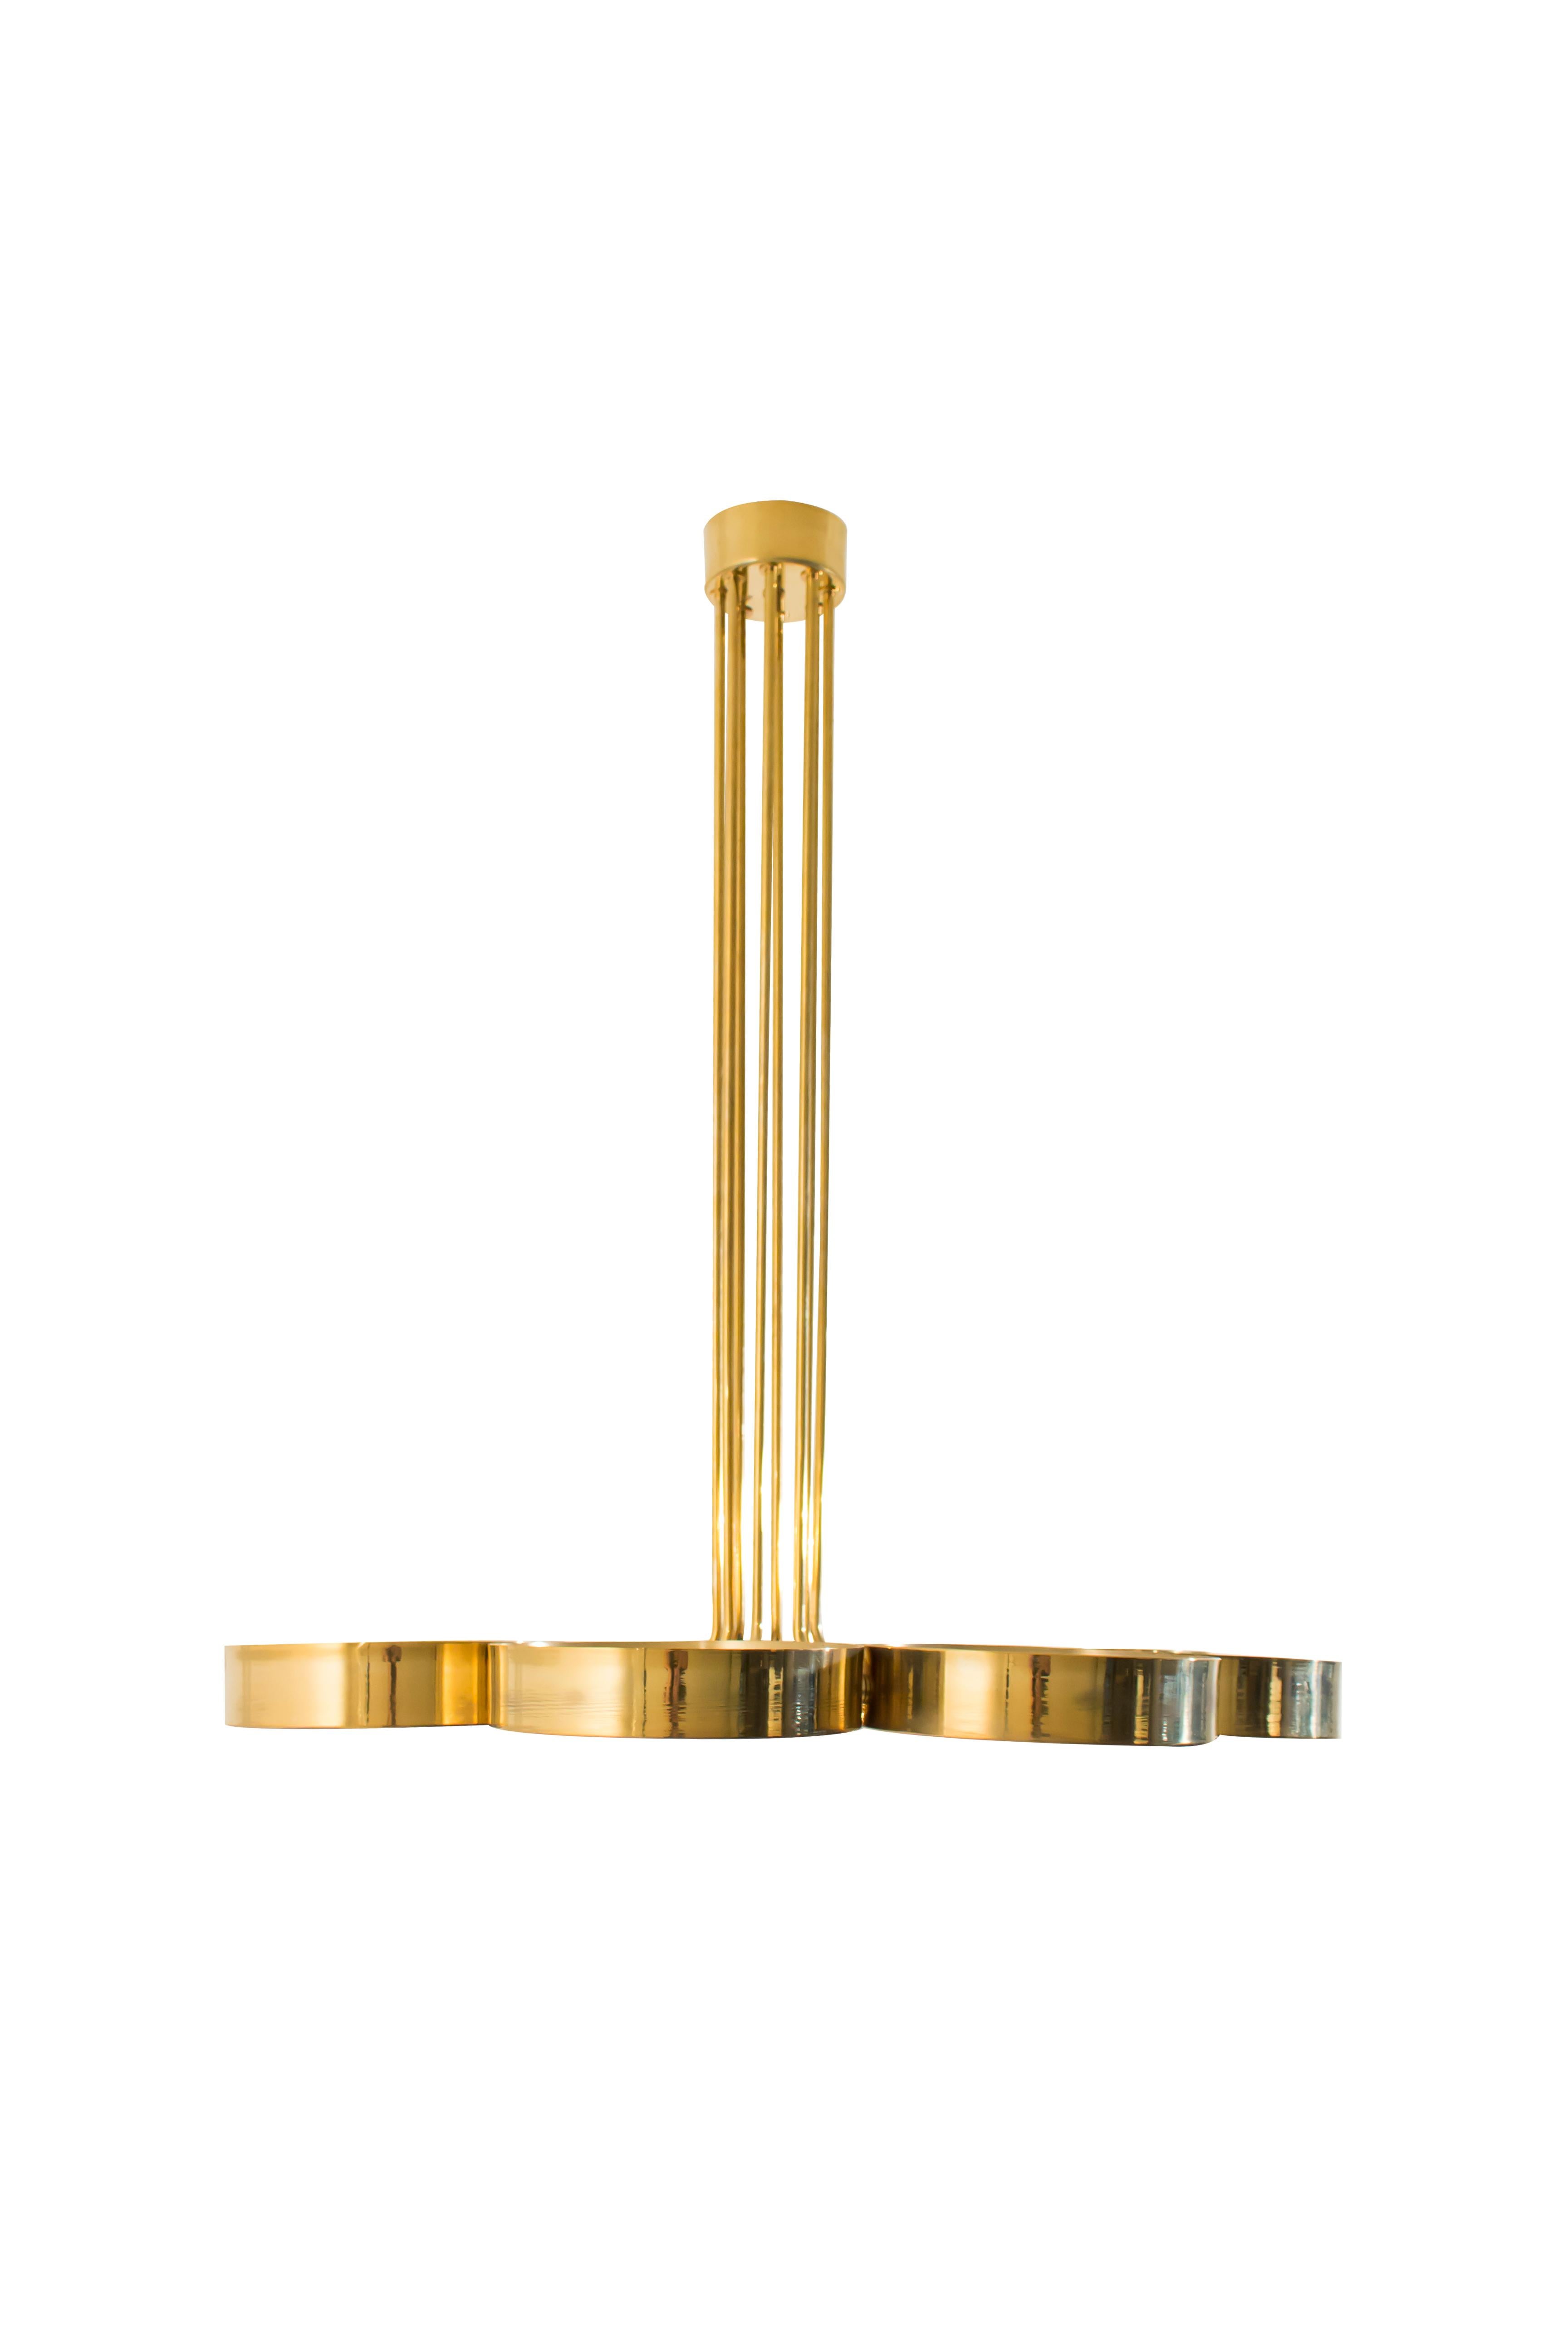 Brass framed ceiling light 

Eight glass diffused circular light points

Made to order in Italy

Contemporary.